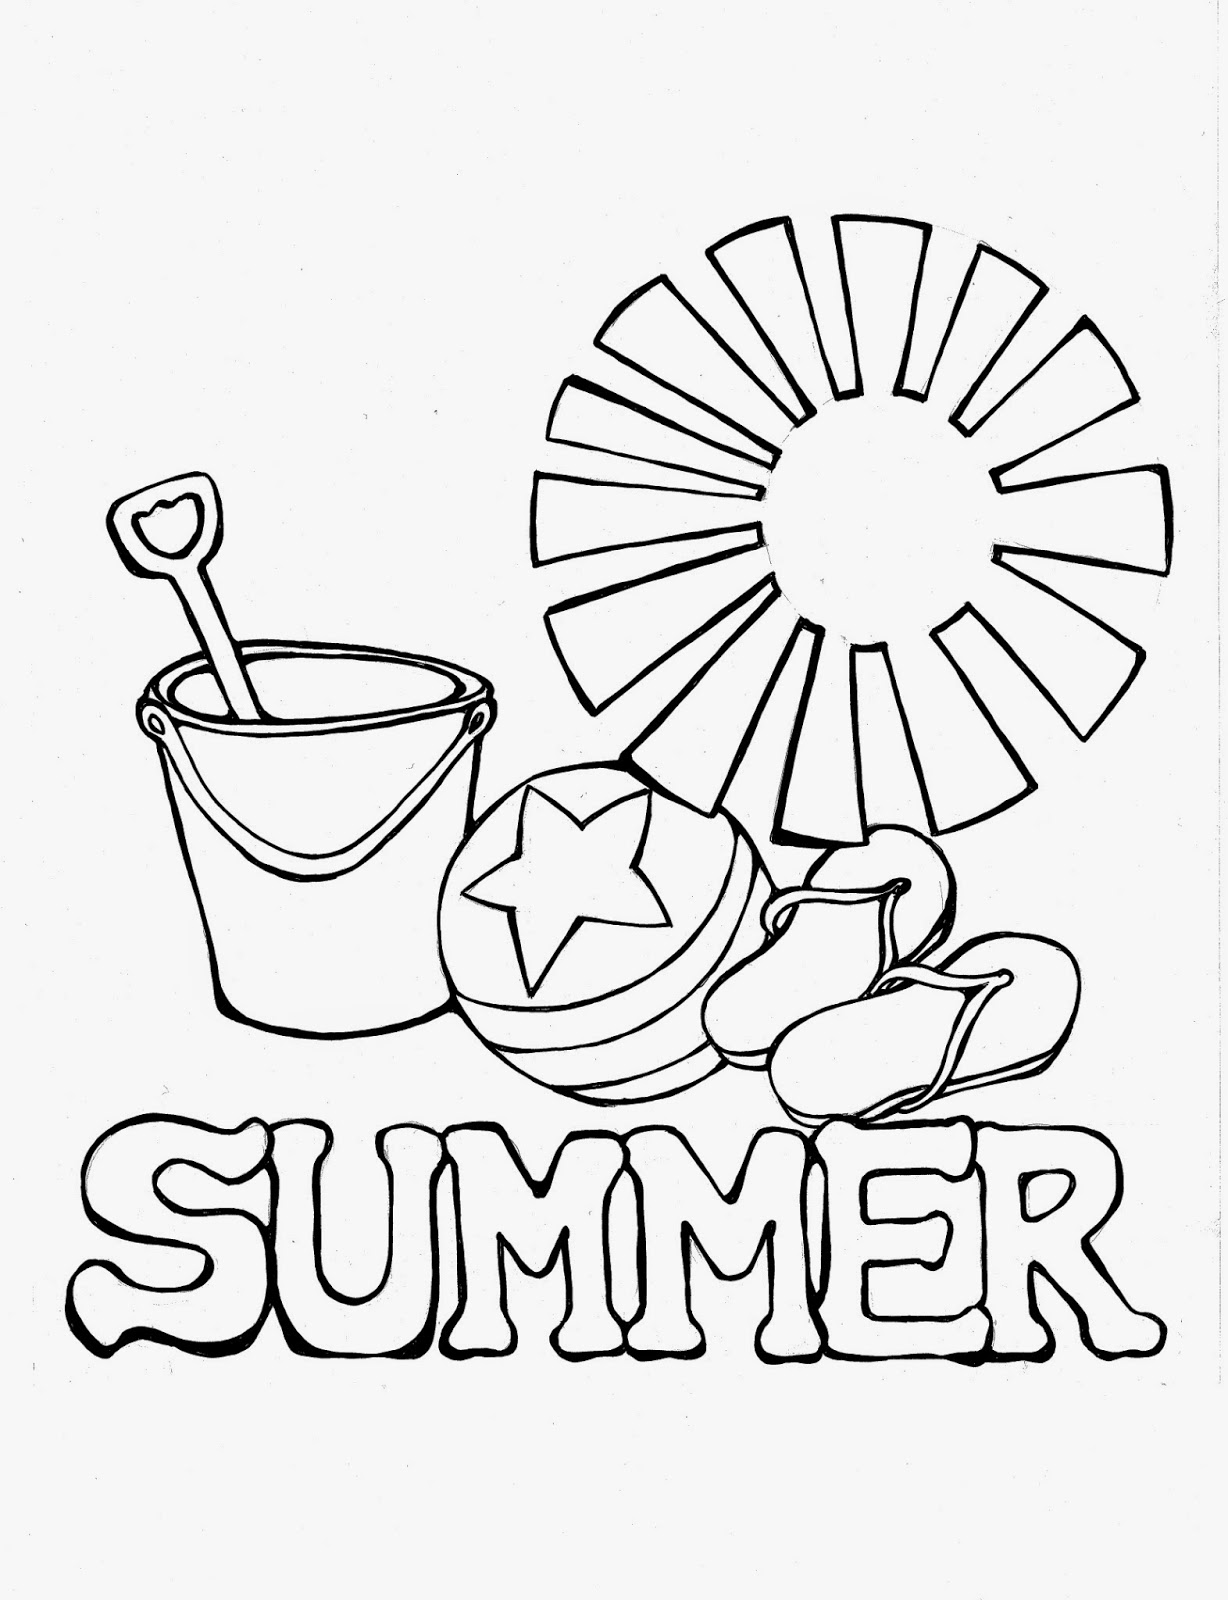 Summertime Coloring Pages 9